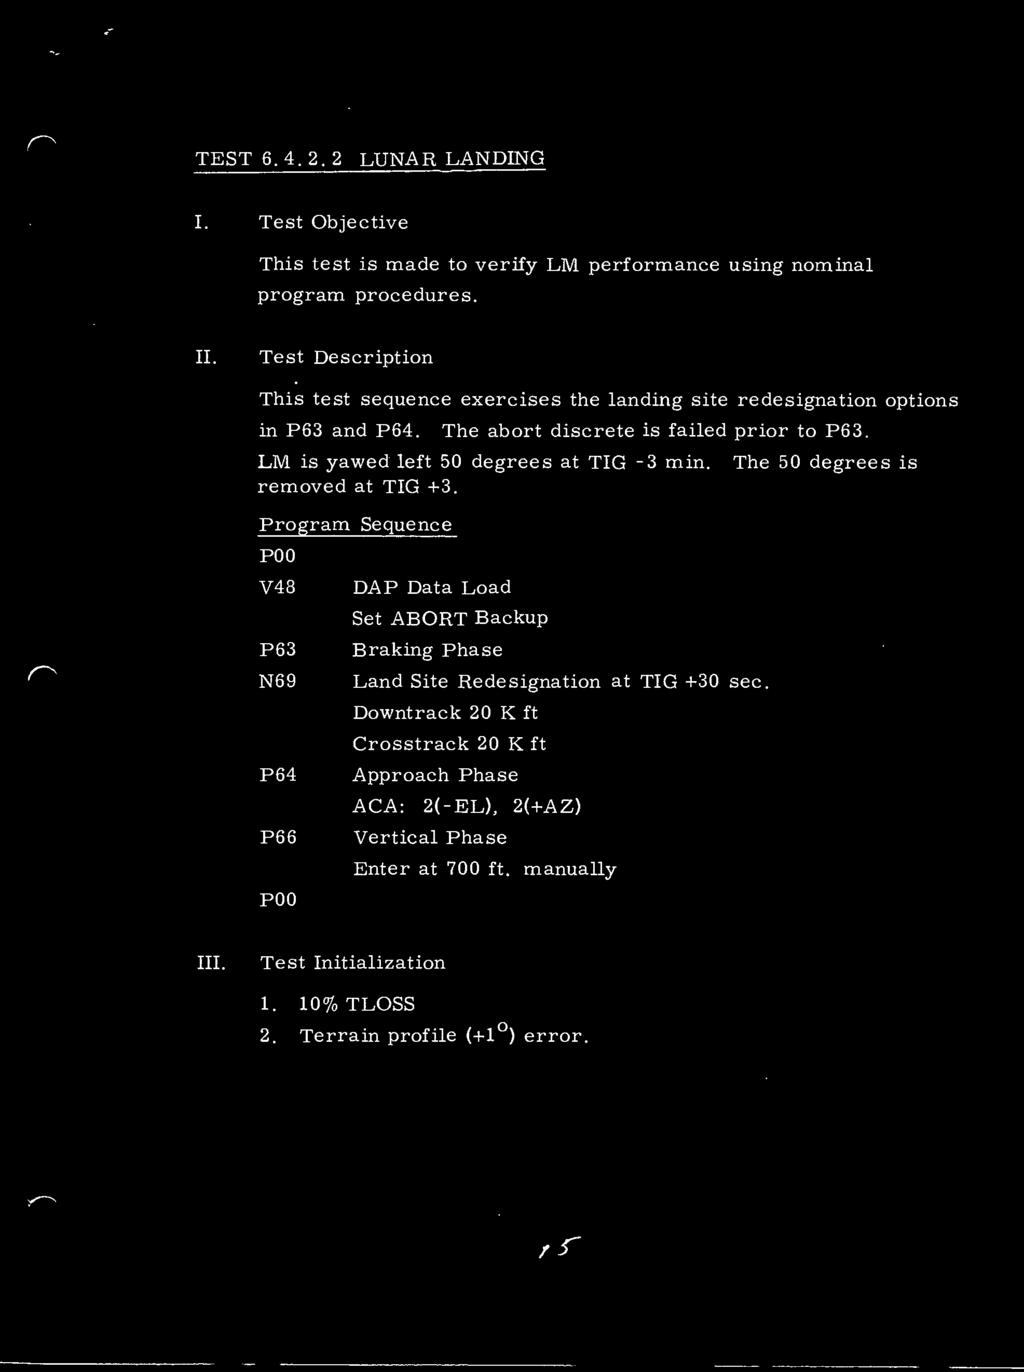 TEST 6.4. 2. 2 LUNAR LANDING This test is made to verify LM performance using nominal program procedures. This test sequence exercises the landing site redesignation options in P63 and P64.